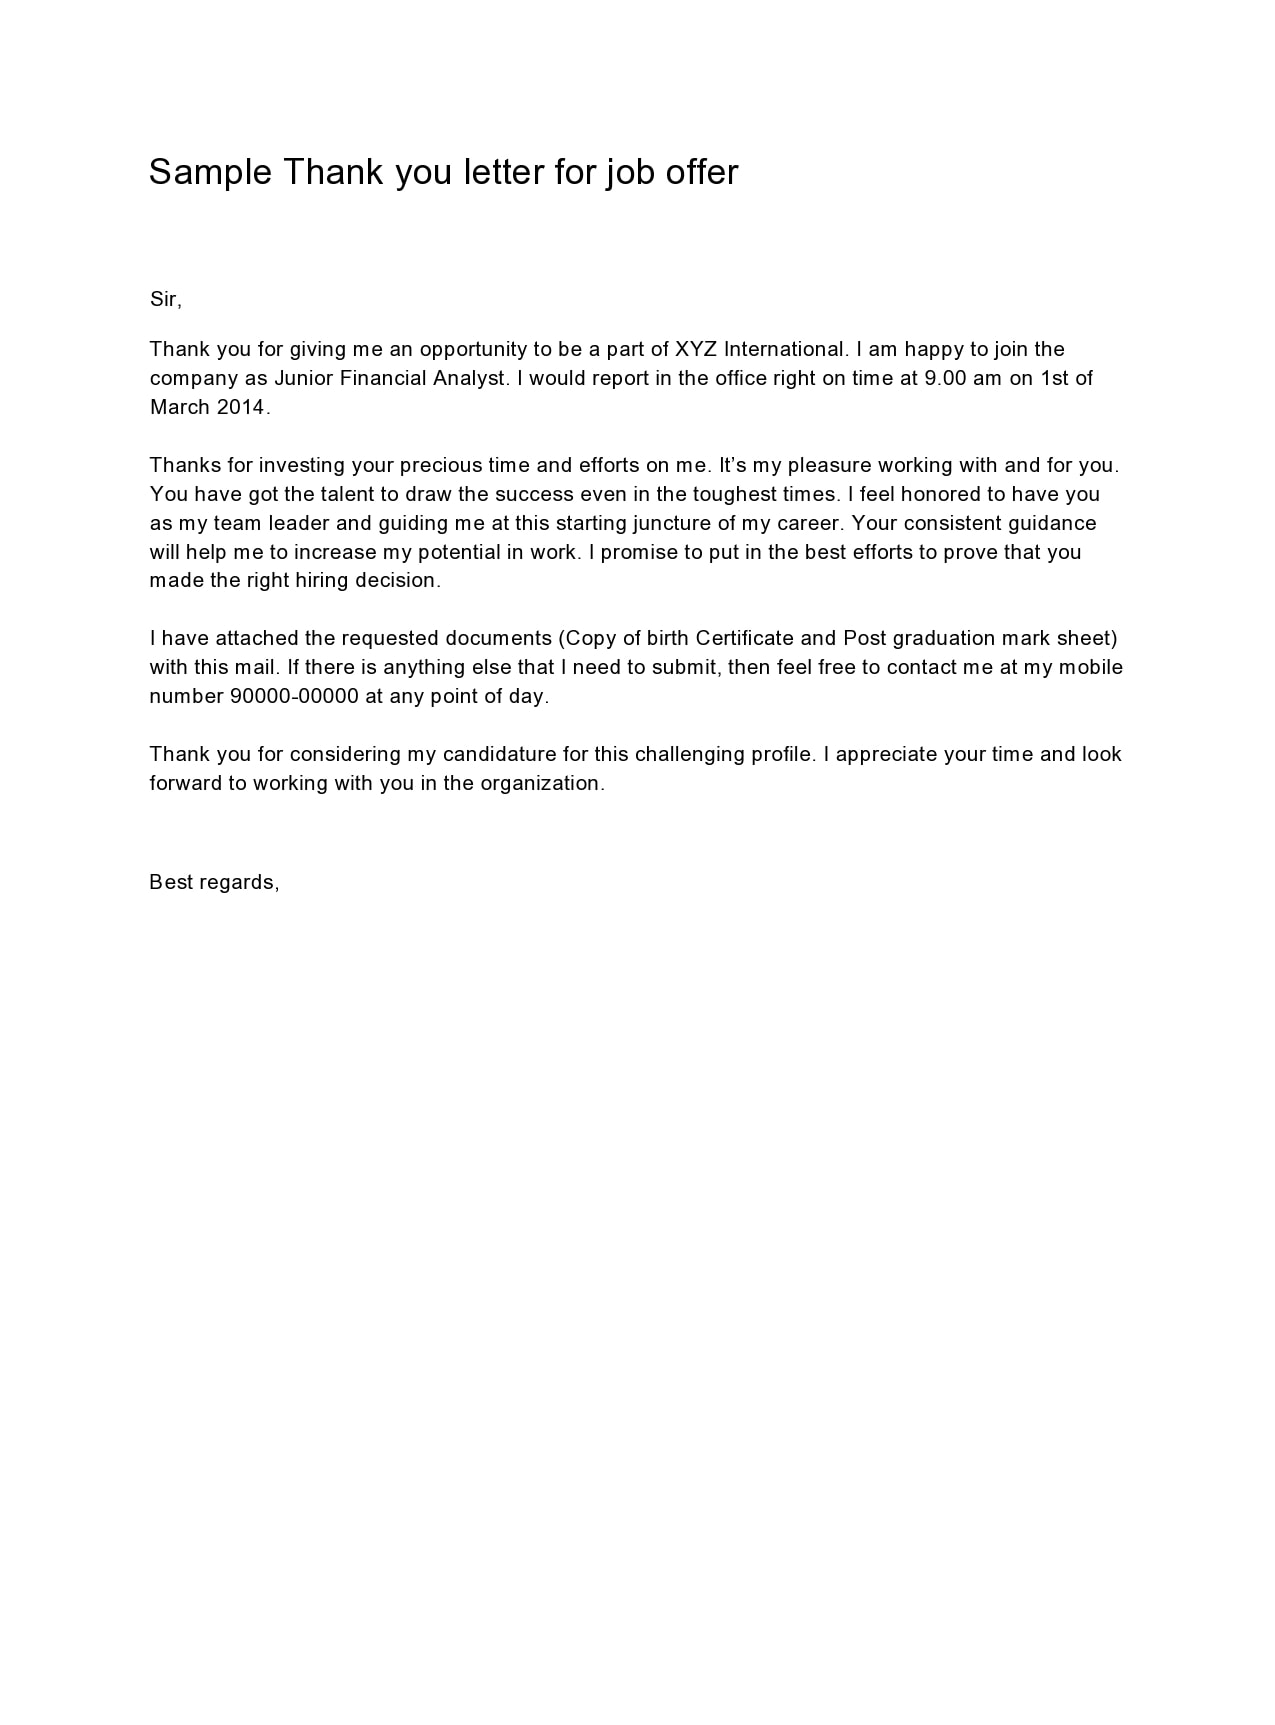 Job Offer Thank You Letter Template